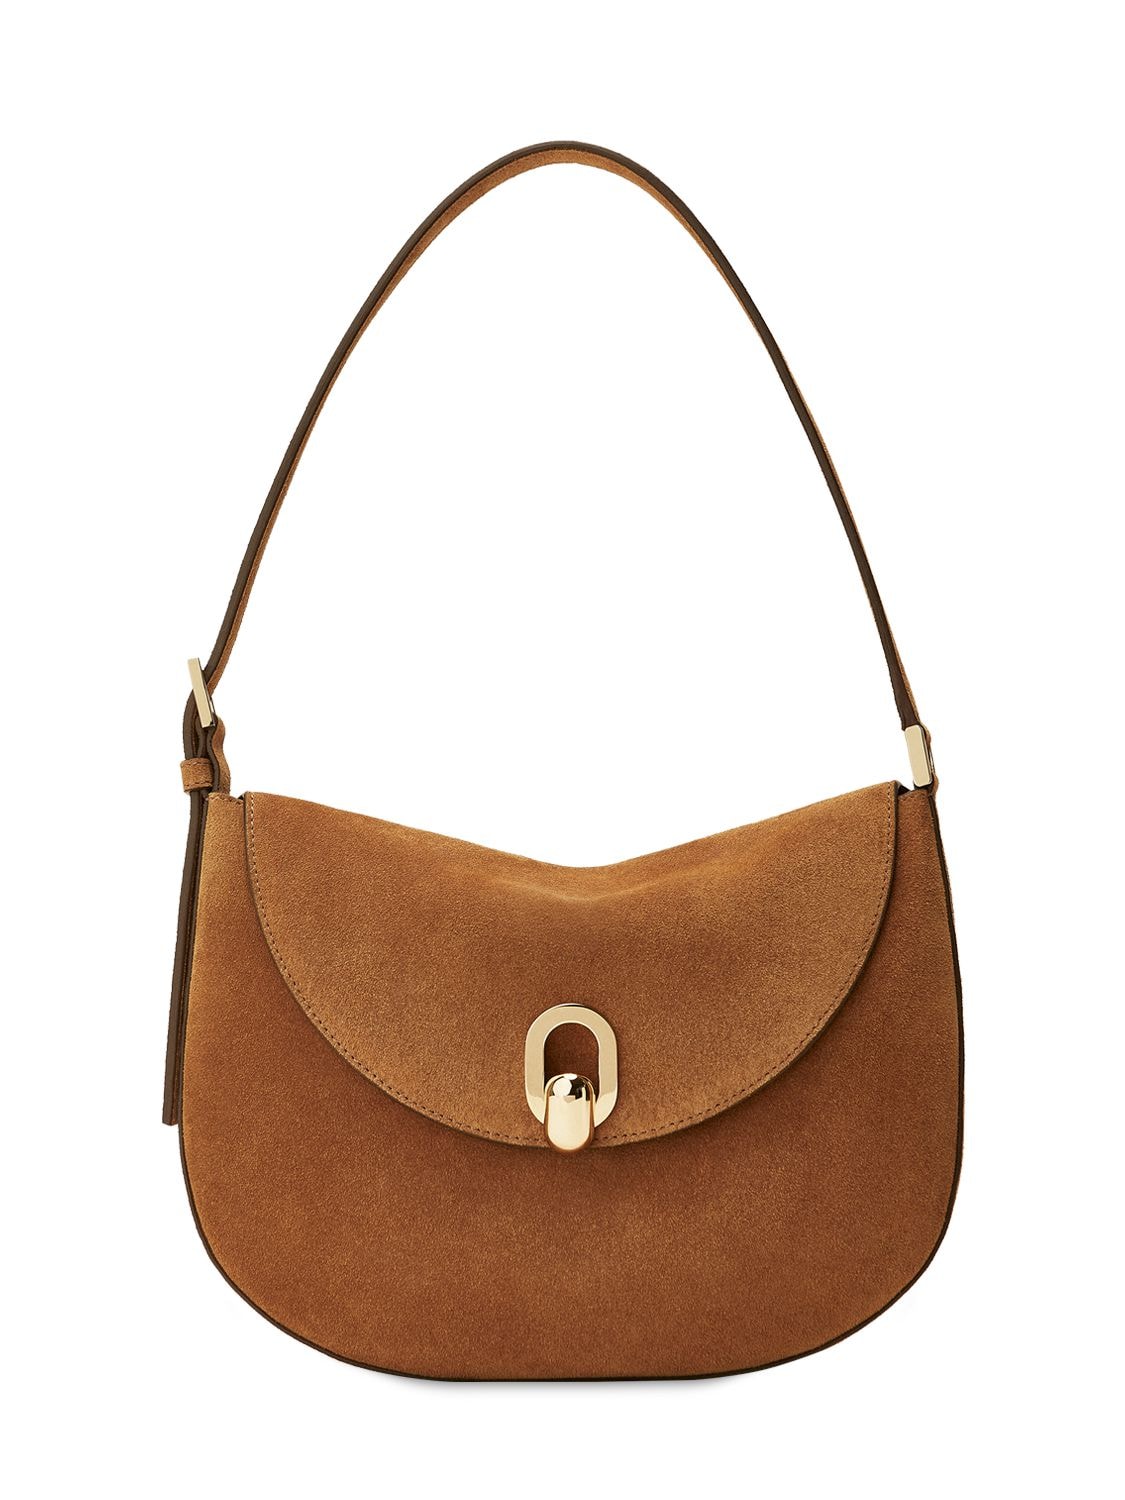 Image of The Tondo Suede Leather Hobo Bag